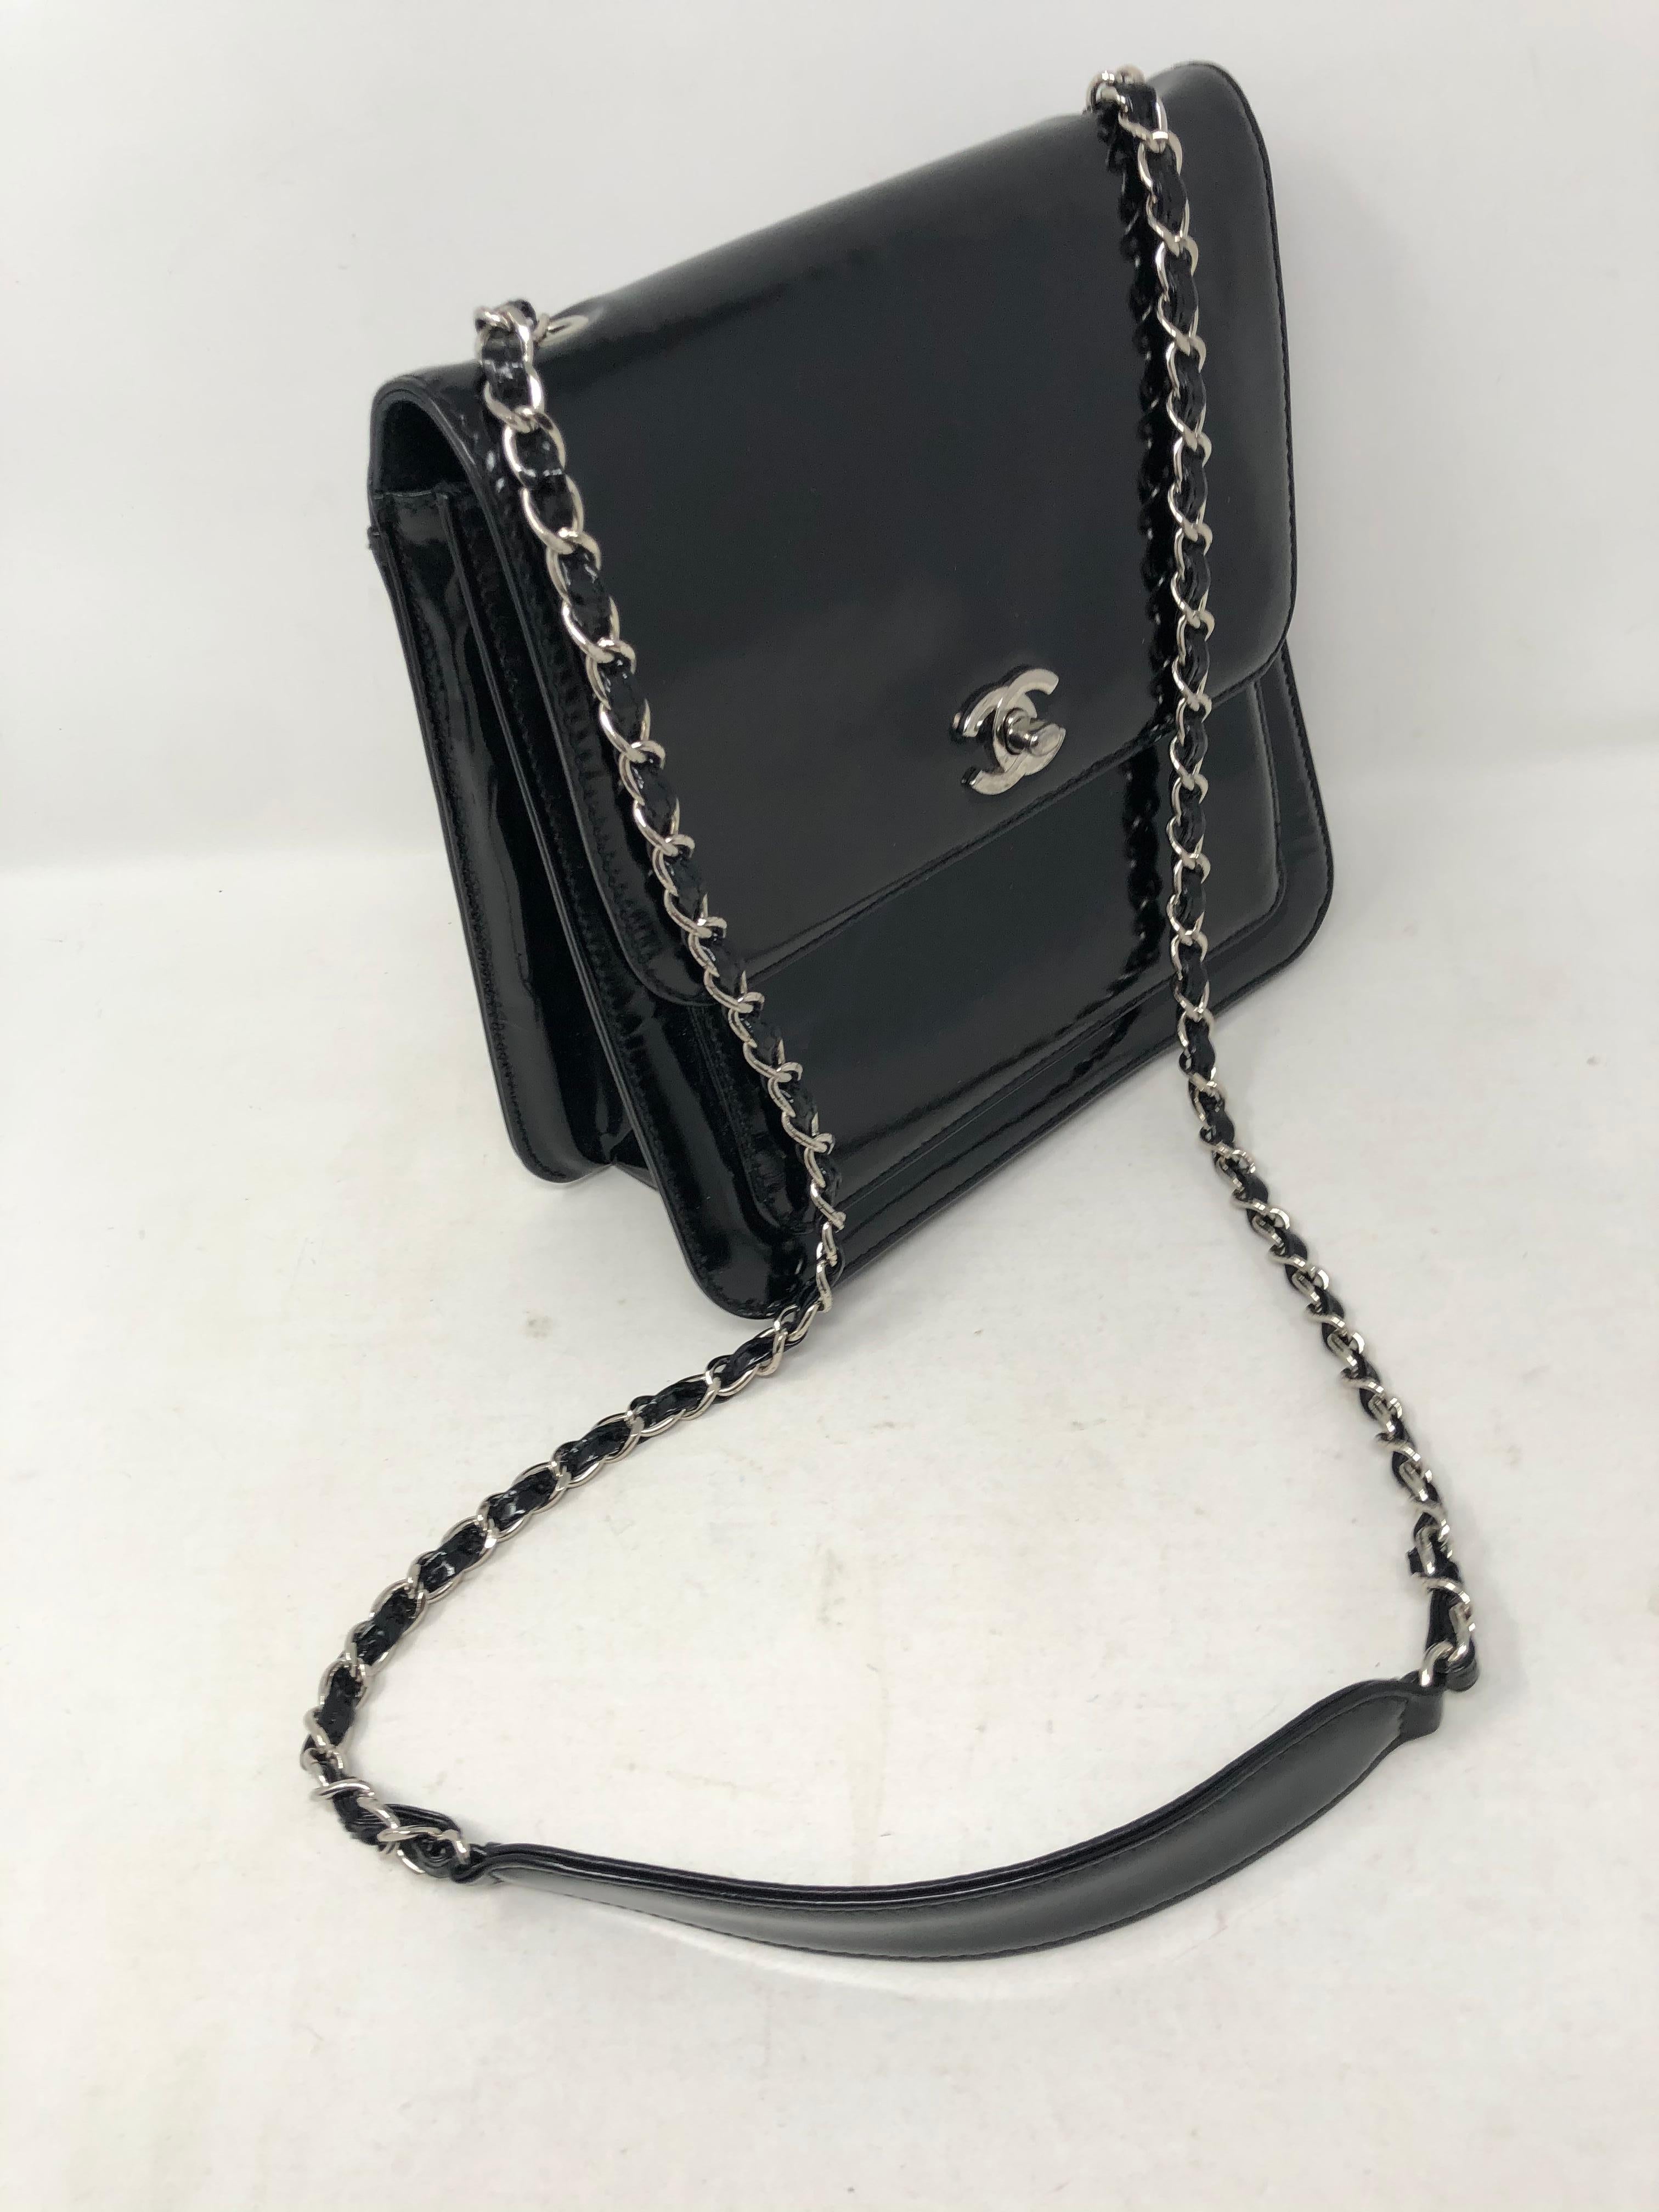 Women's or Men's Chanel Black Patent Leather Bag 